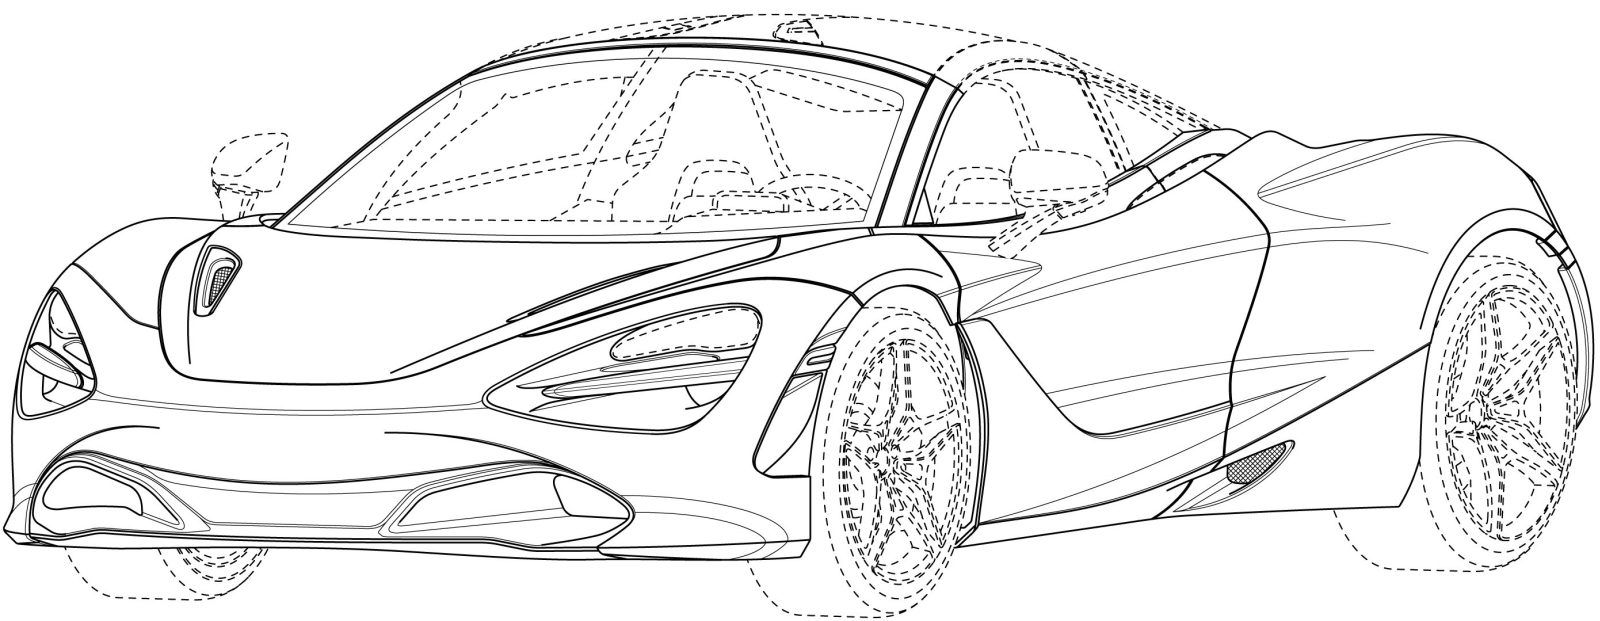 Mclaren 720s Coloring Pages Coloring Pages